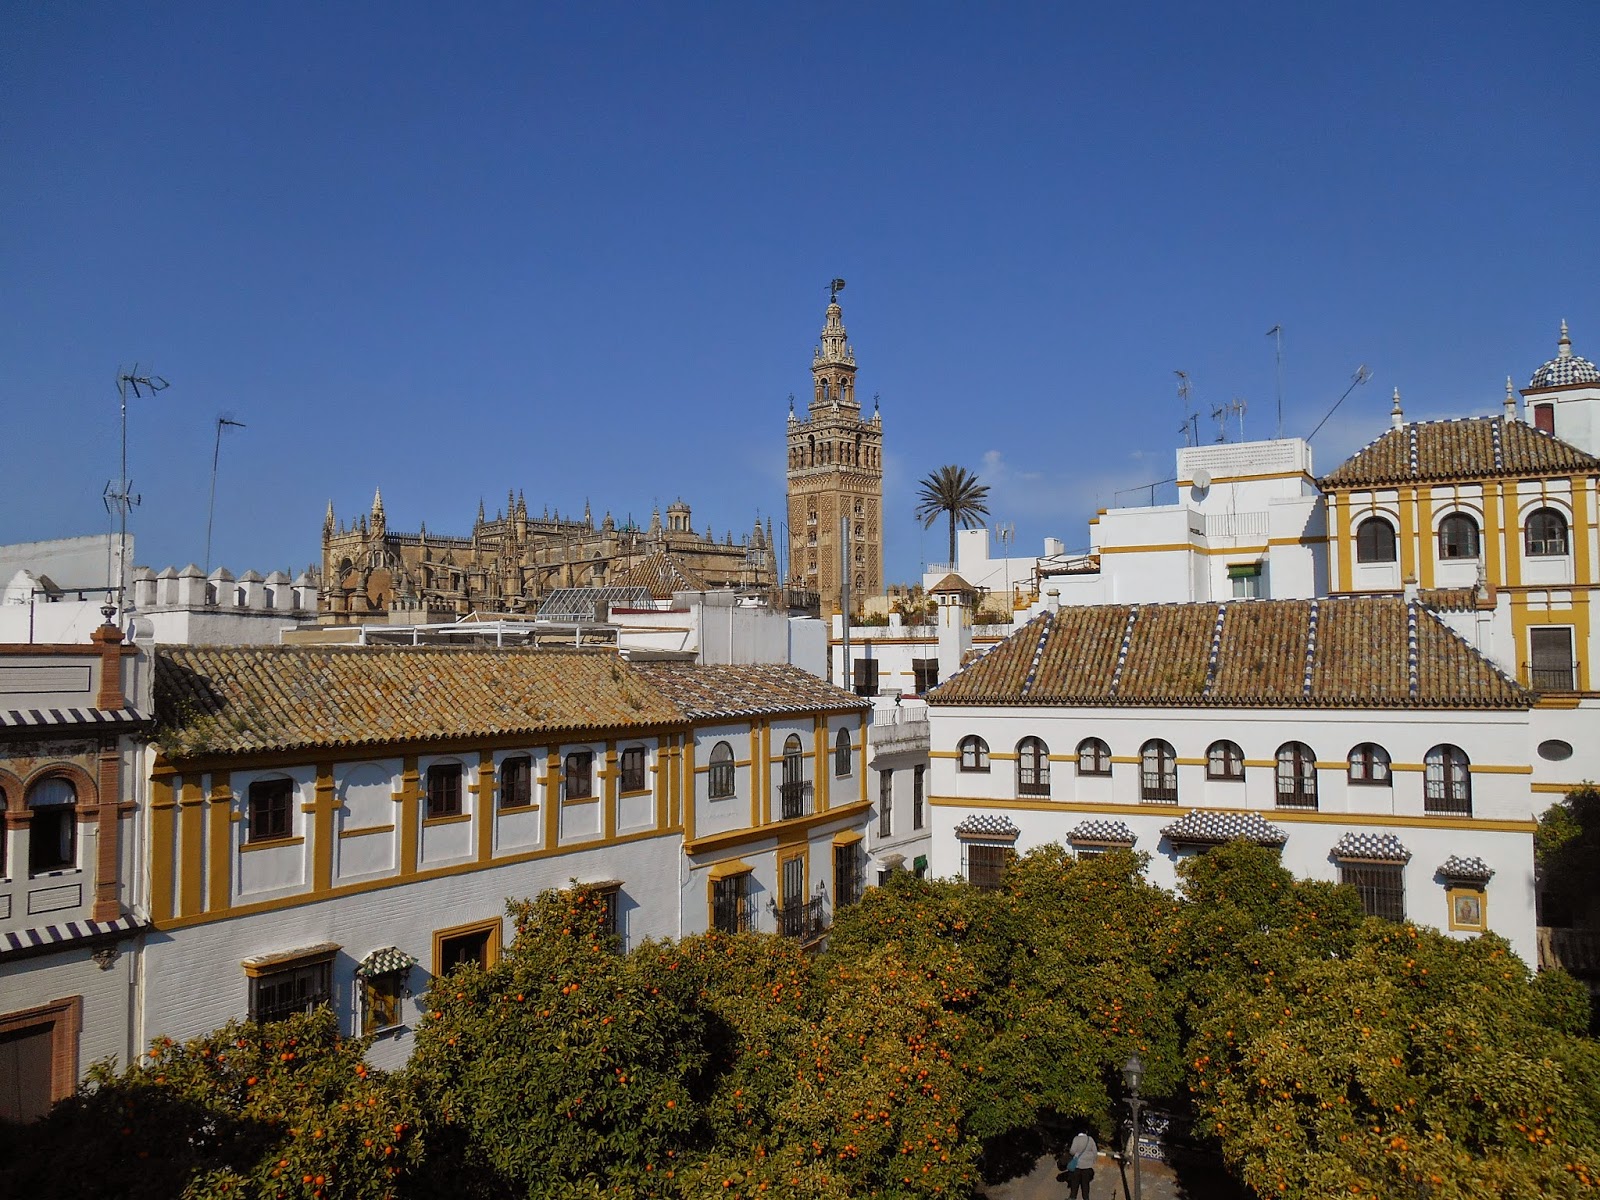 Guided tour of Jewish quarter and cathedral. Visit the lookout in Museo Pintor Amalio